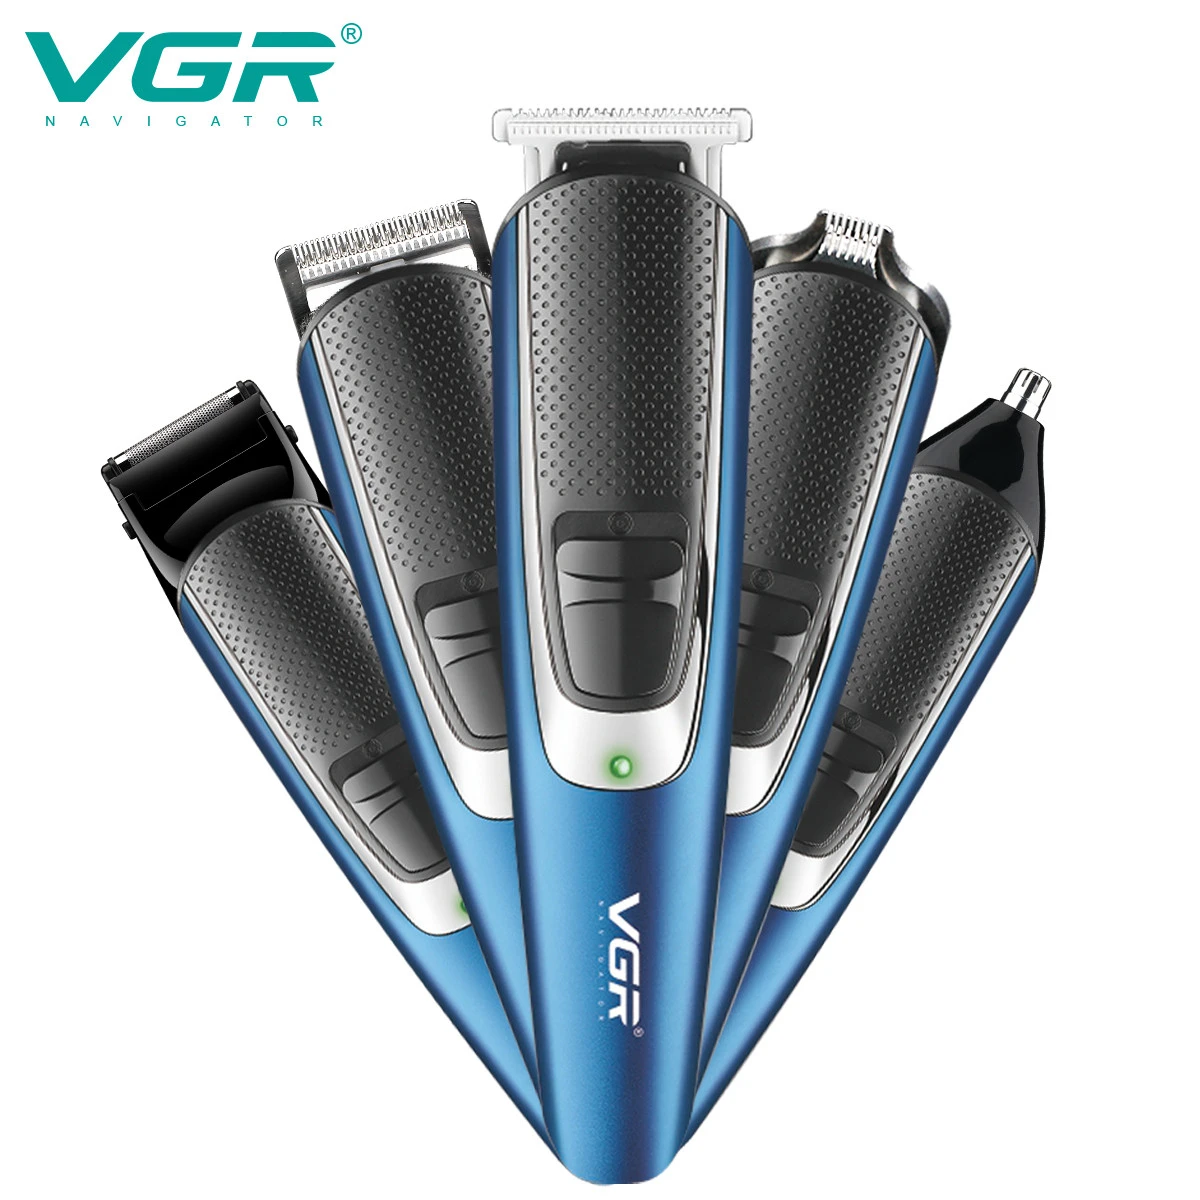 VGR  men electric hair trimmer V-172 electric grooming kits hair clipper trimmer grooming set